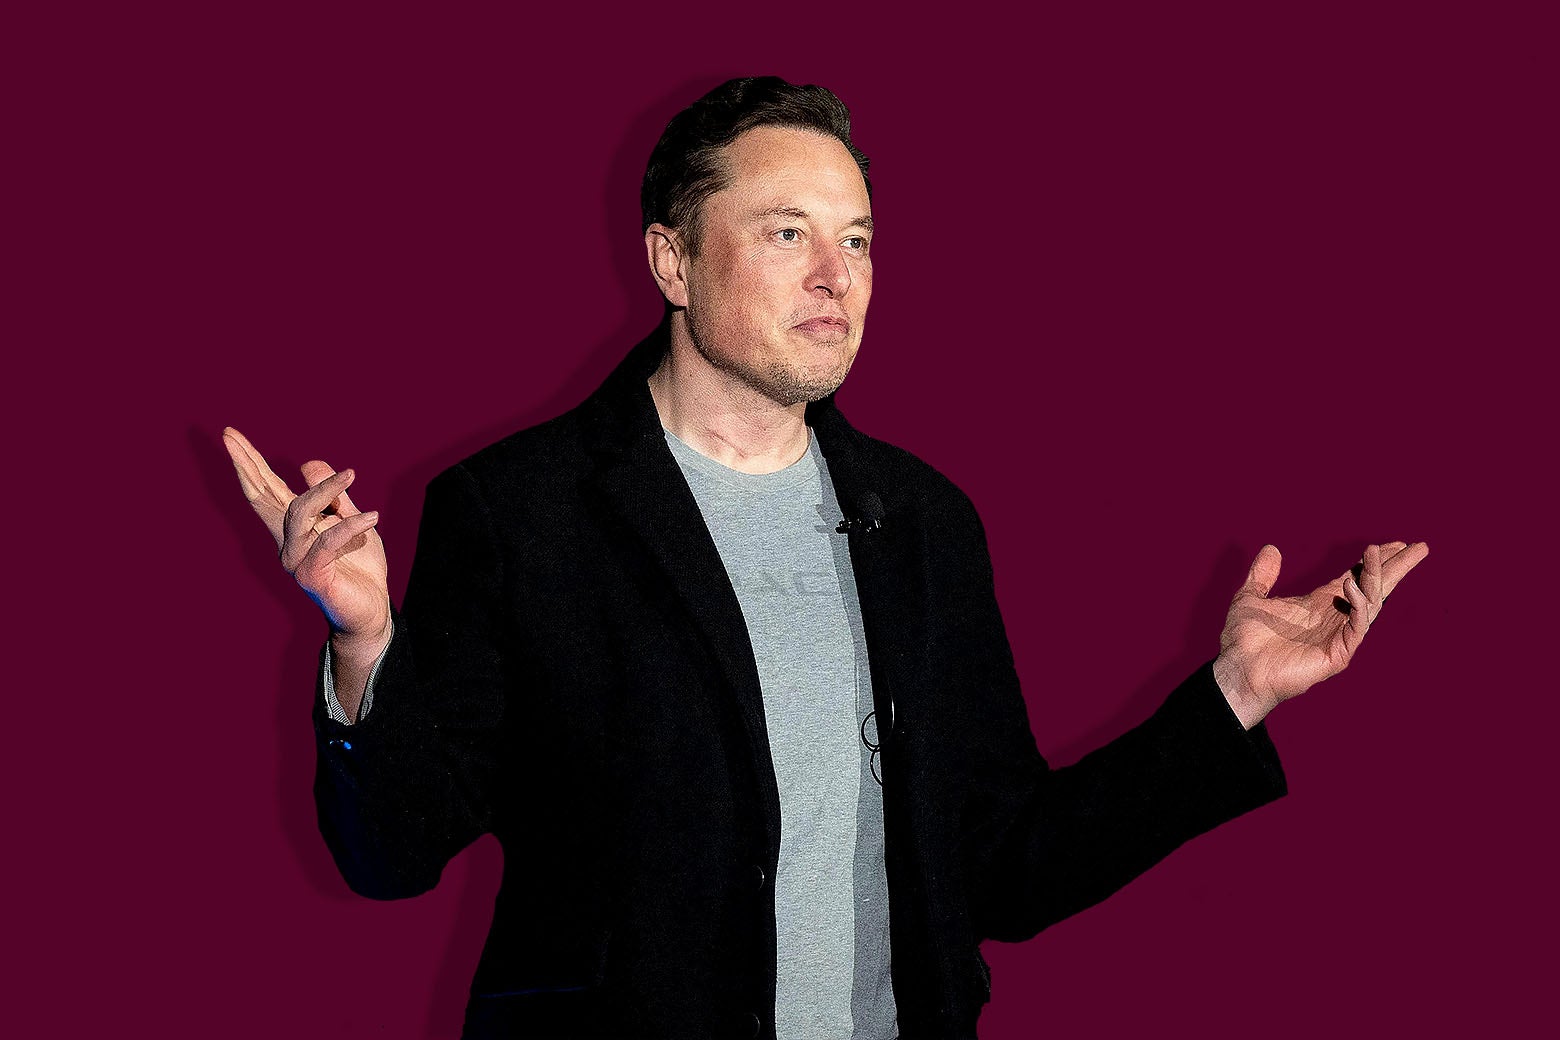 Musk standing with his arms raised making an "eh, why not" gesture